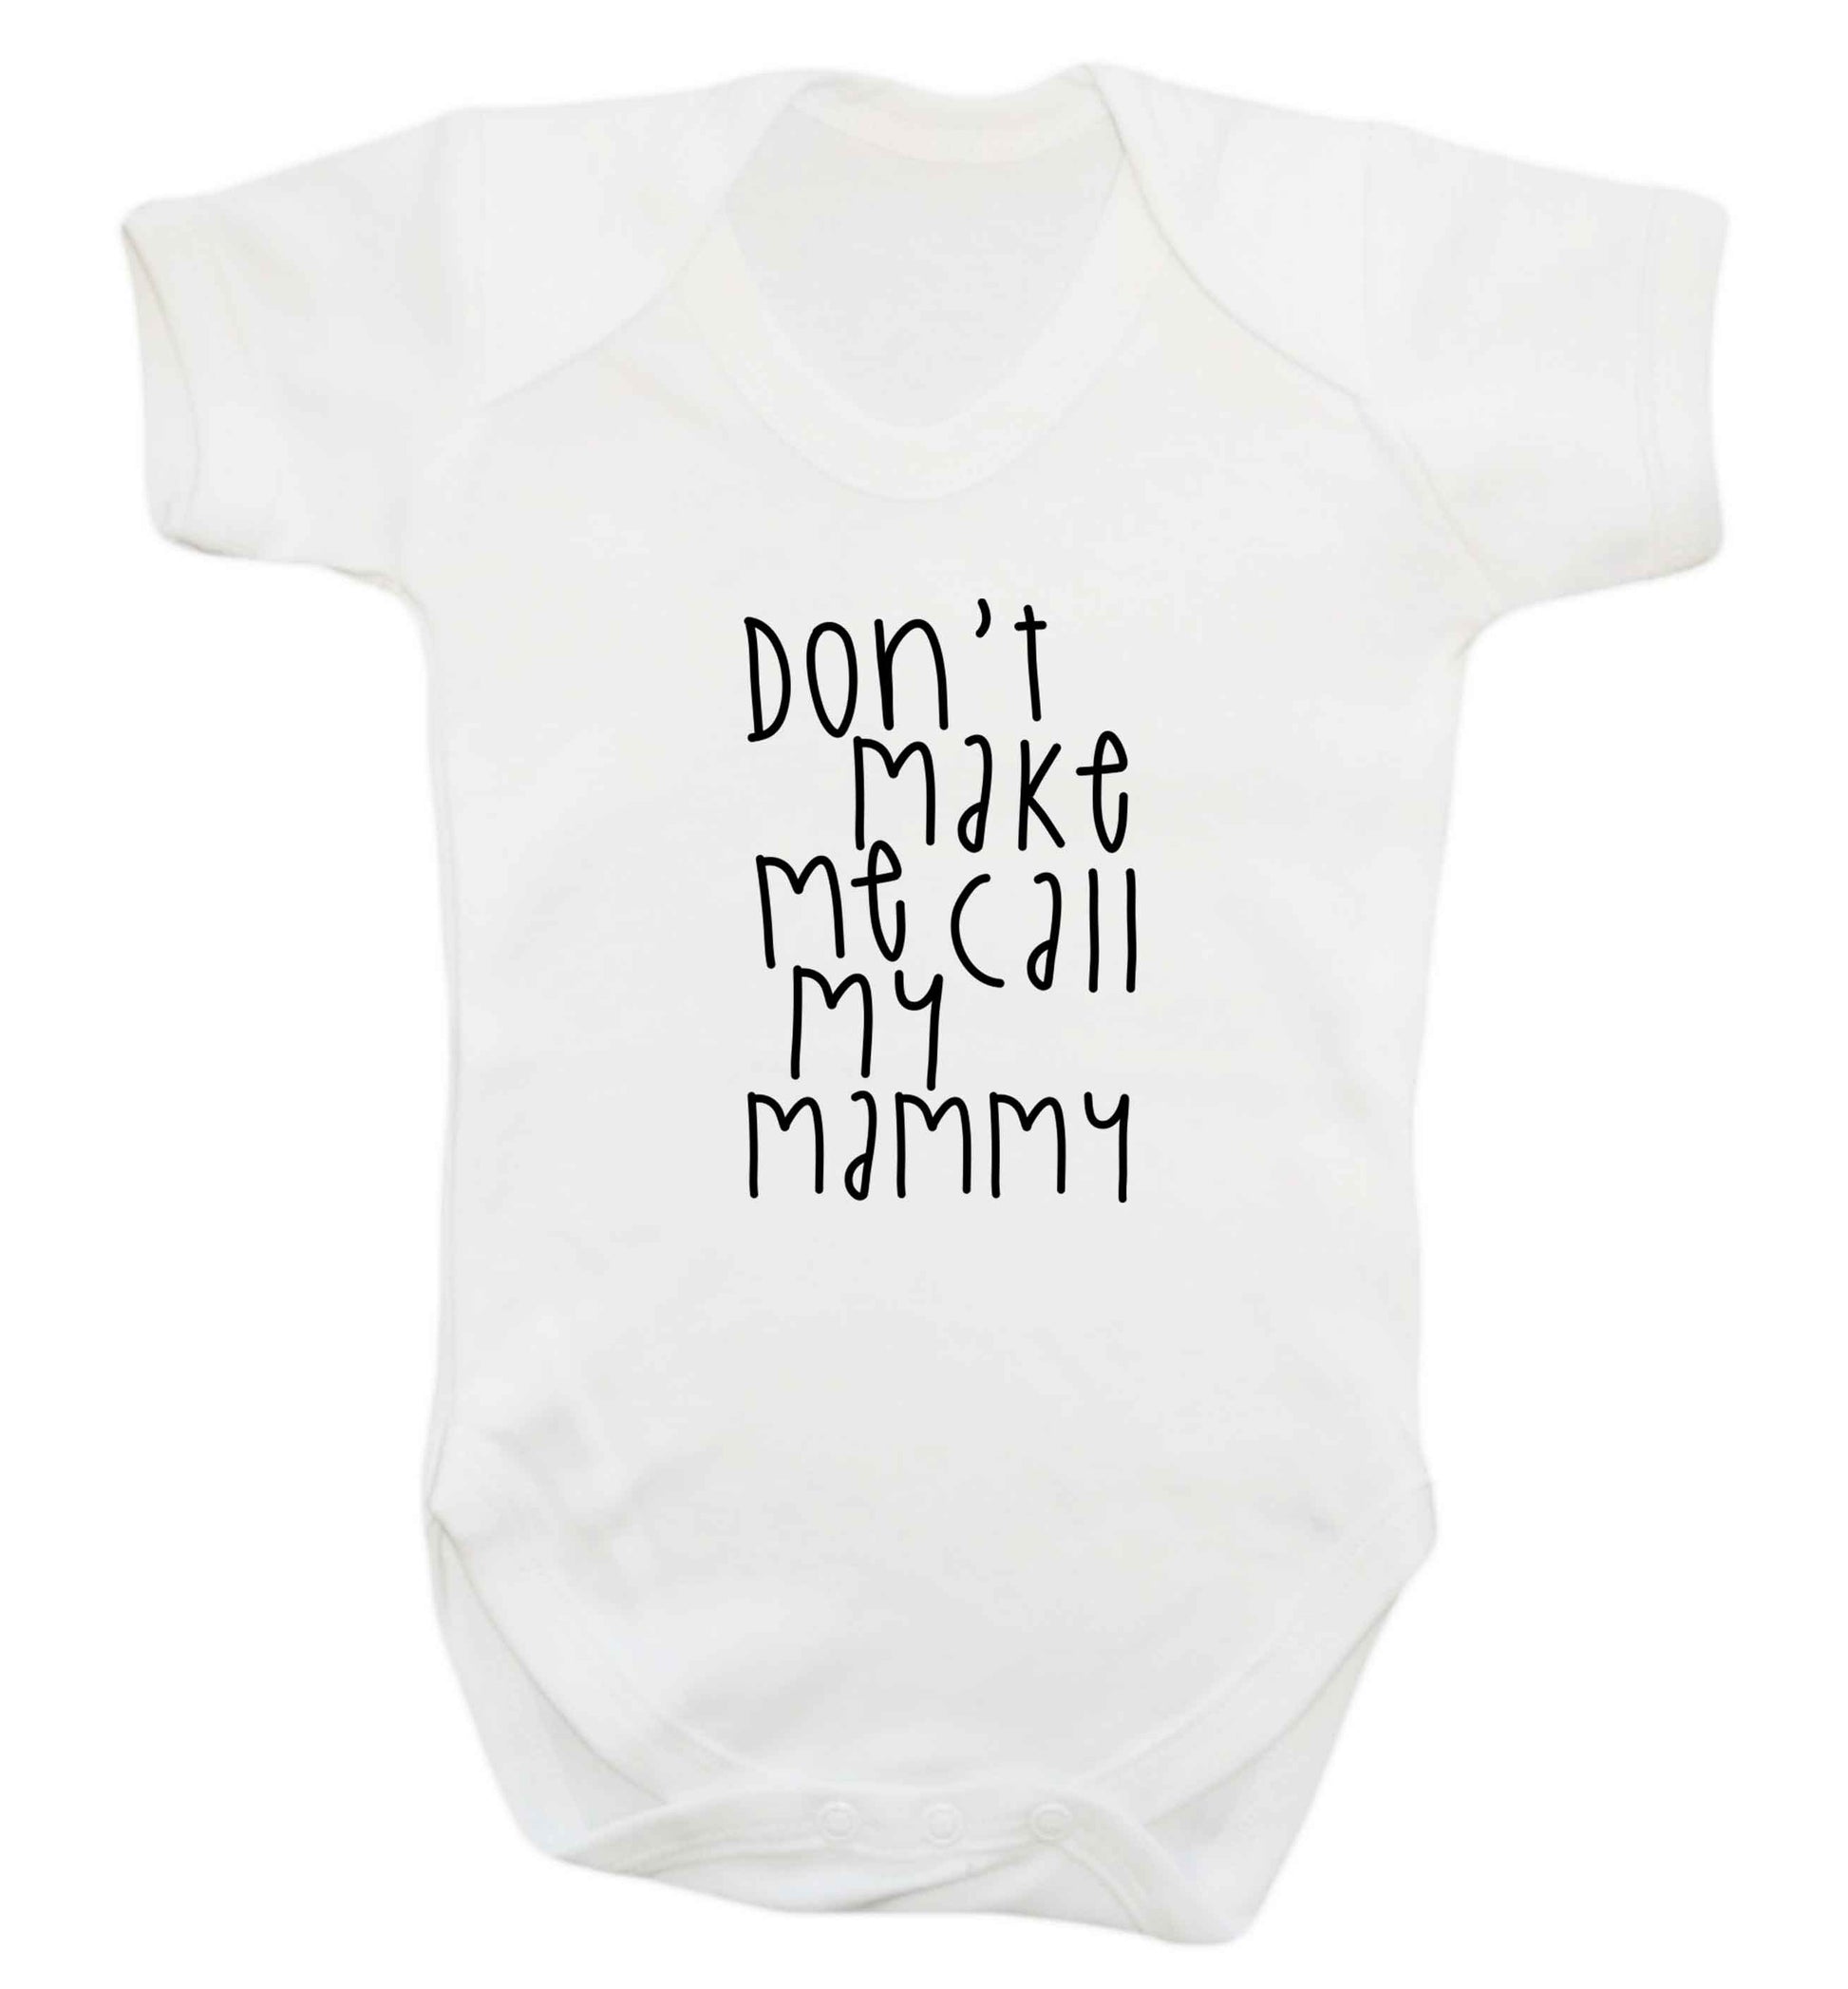 Don't make me call my mammy baby vest white 18-24 months